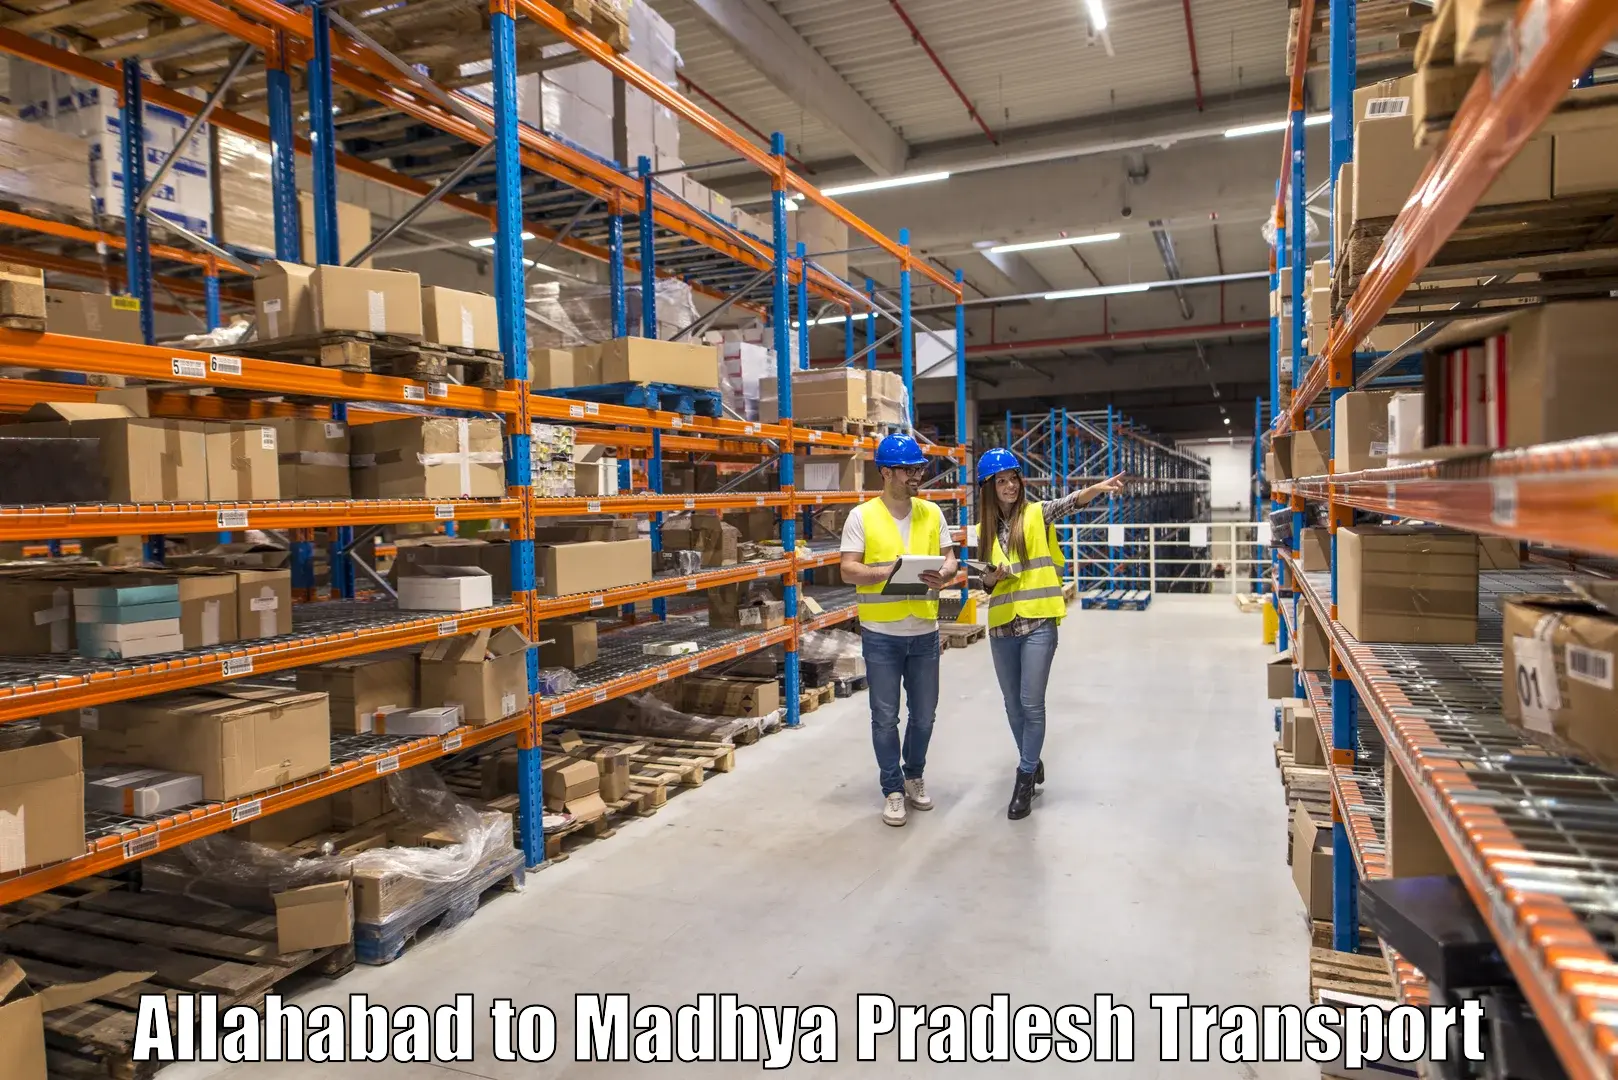 Daily parcel service transport Allahabad to Chhatarpur